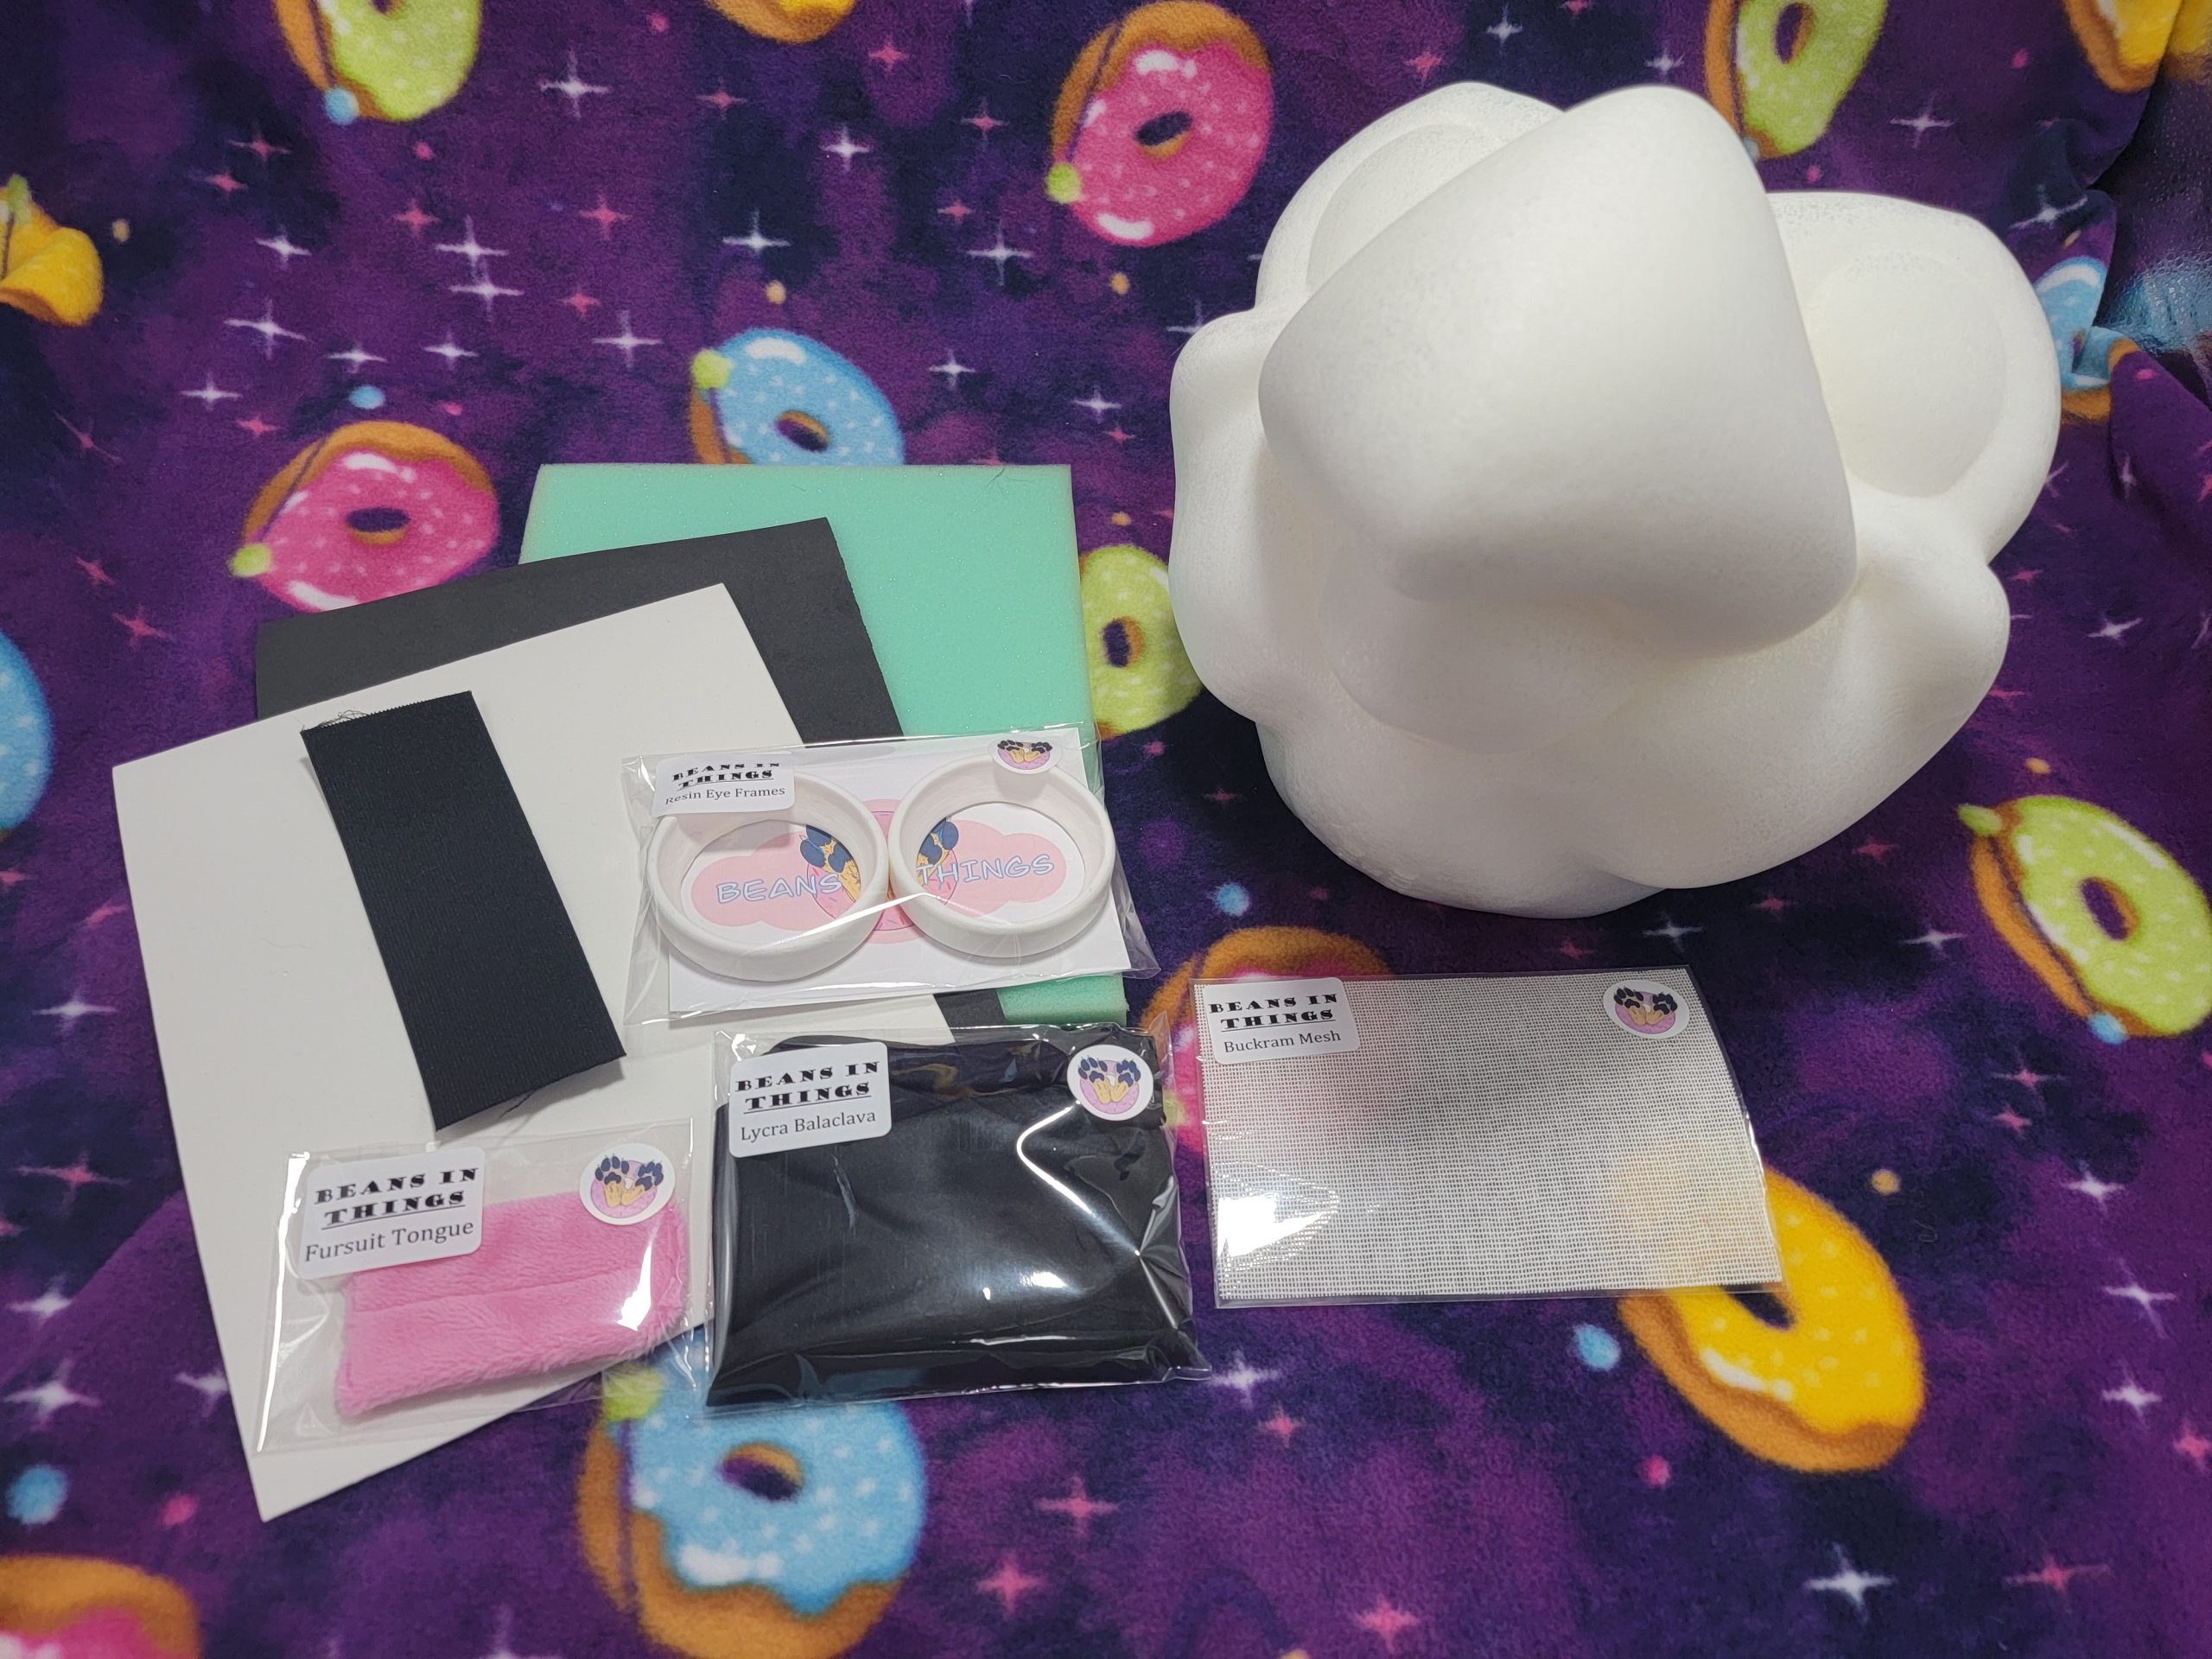 A kit for creating your own bird costume is shown. To the right is a cartoon bird base made from soft foam, surrounded by foam sheets, resin eye frames, a pink fabric tongue, a pouch with a folded balaclava and two strips of elastic.